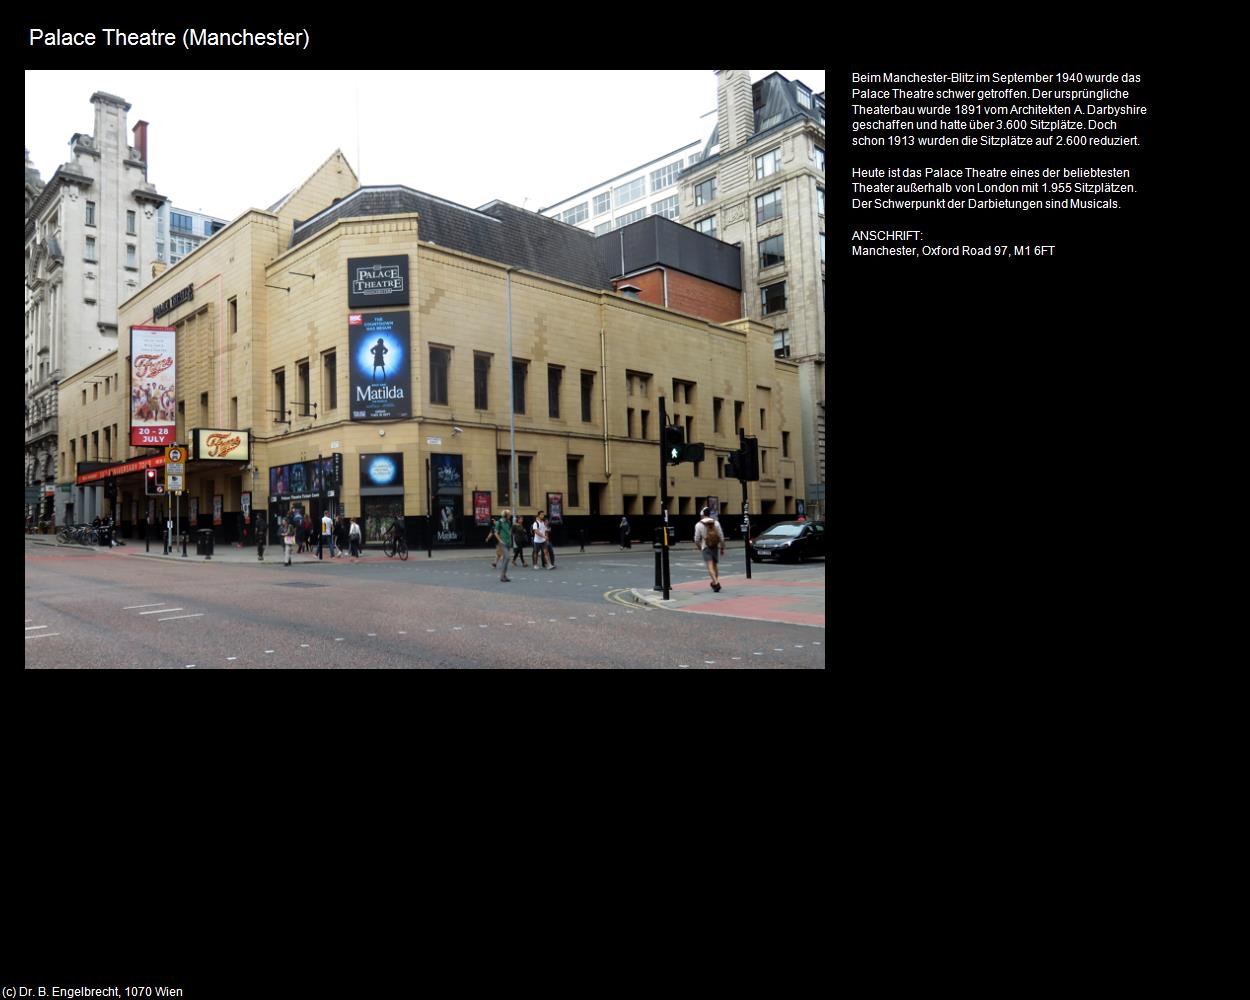 Palace Theatre  (Manchester, England  ) in Kulturatlas-ENGLAND und WALES